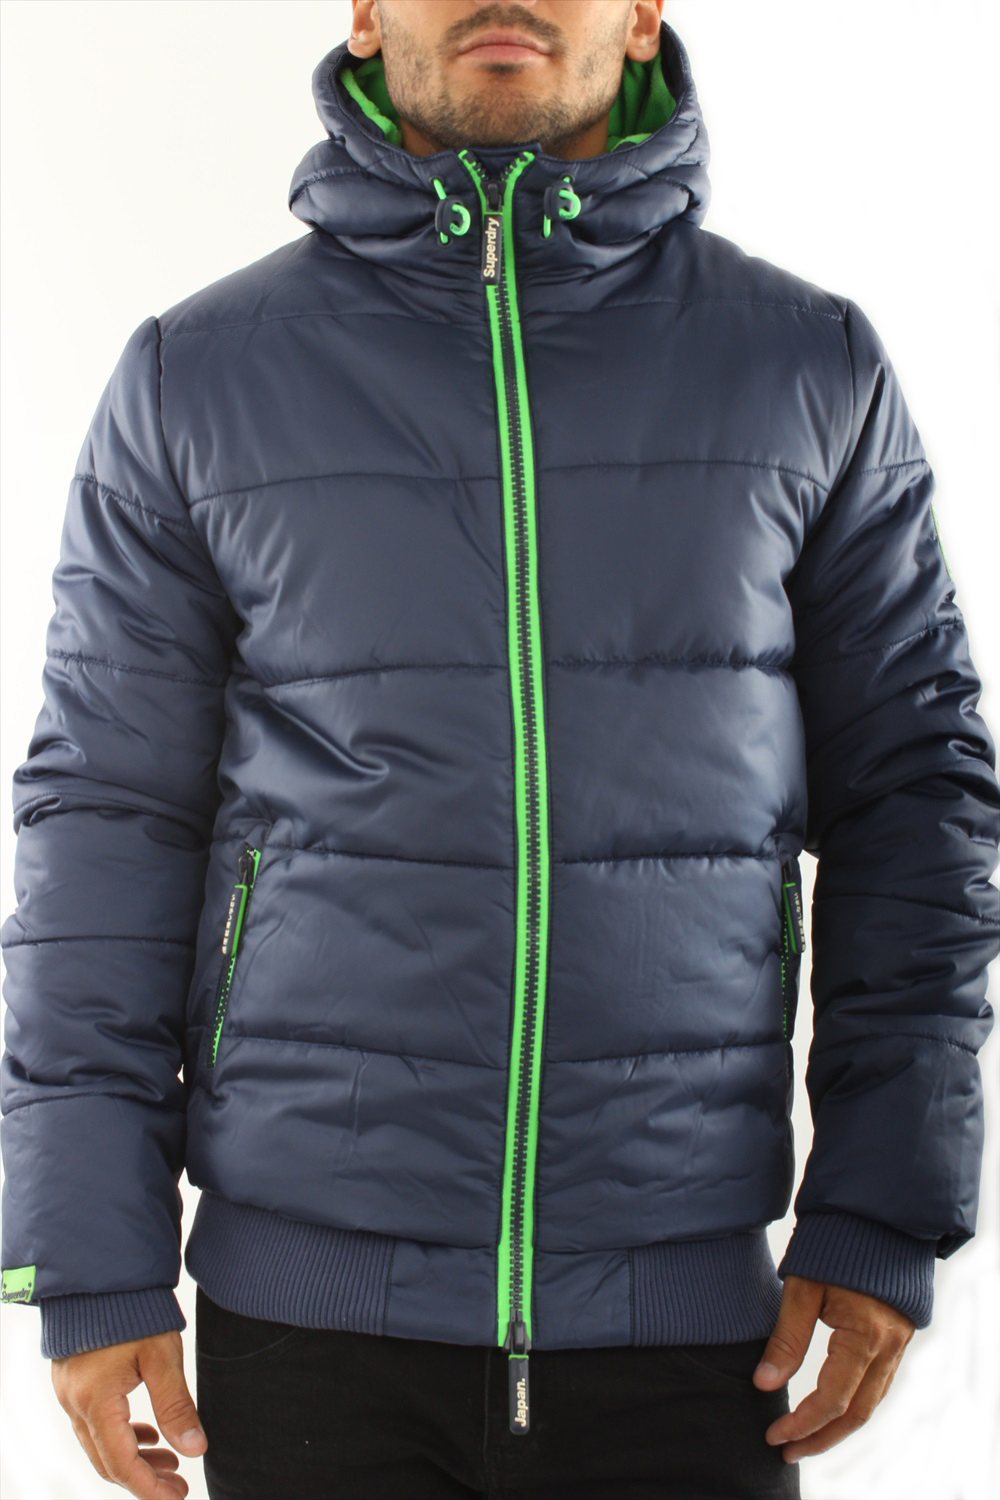 periscoop Permanent Station Buy Superdry Jacket 'Polar Sports Puffer' GJR QUILL INK